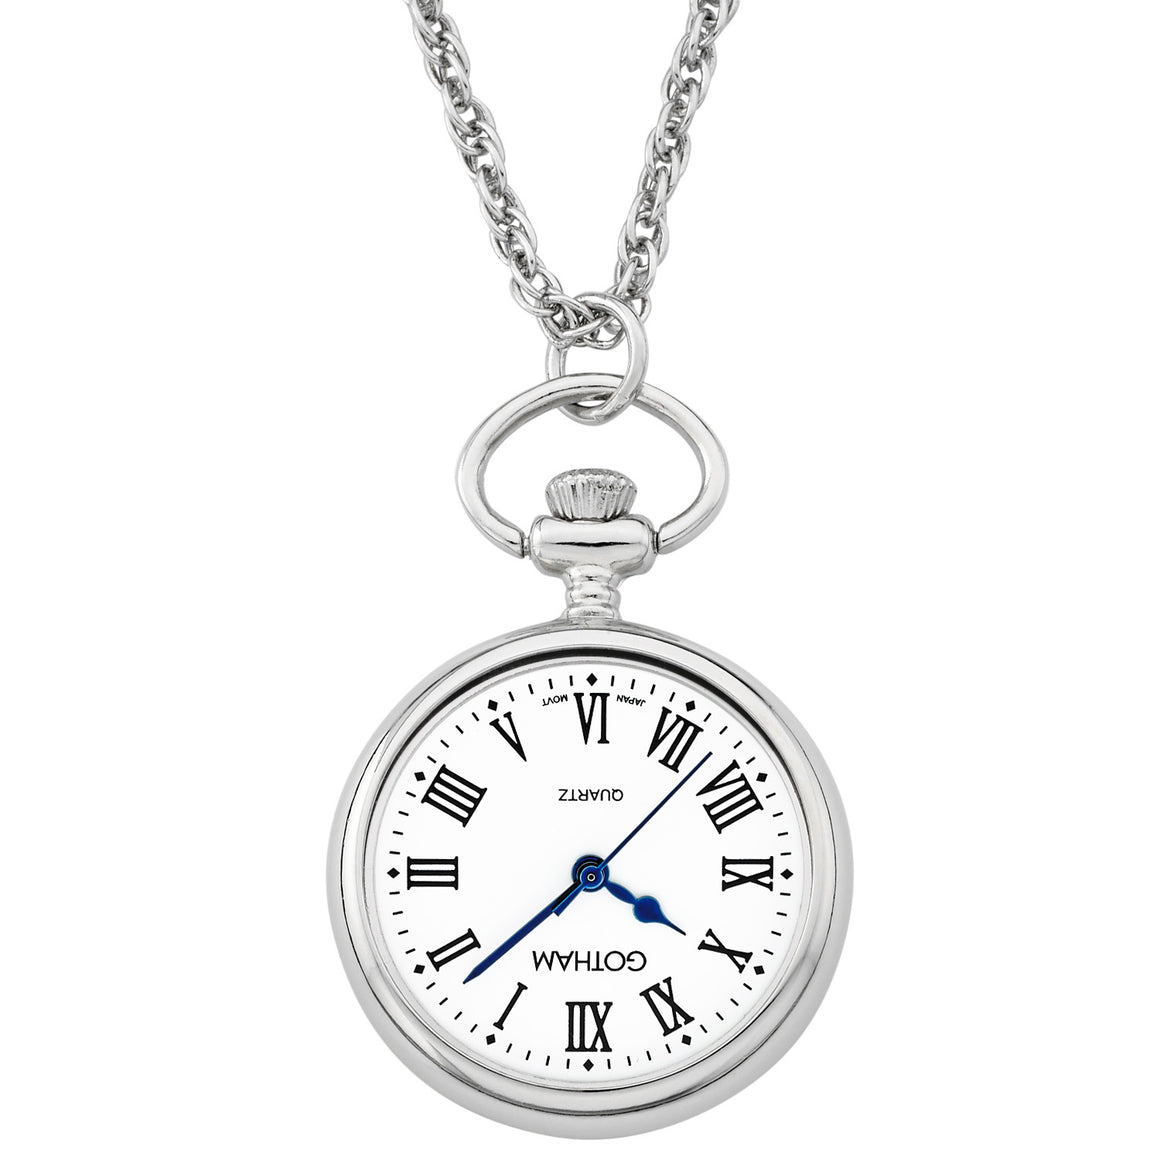 Gotham Women's Silver-Tone Open Face Pendant Watch With Chain # GWC14135SR